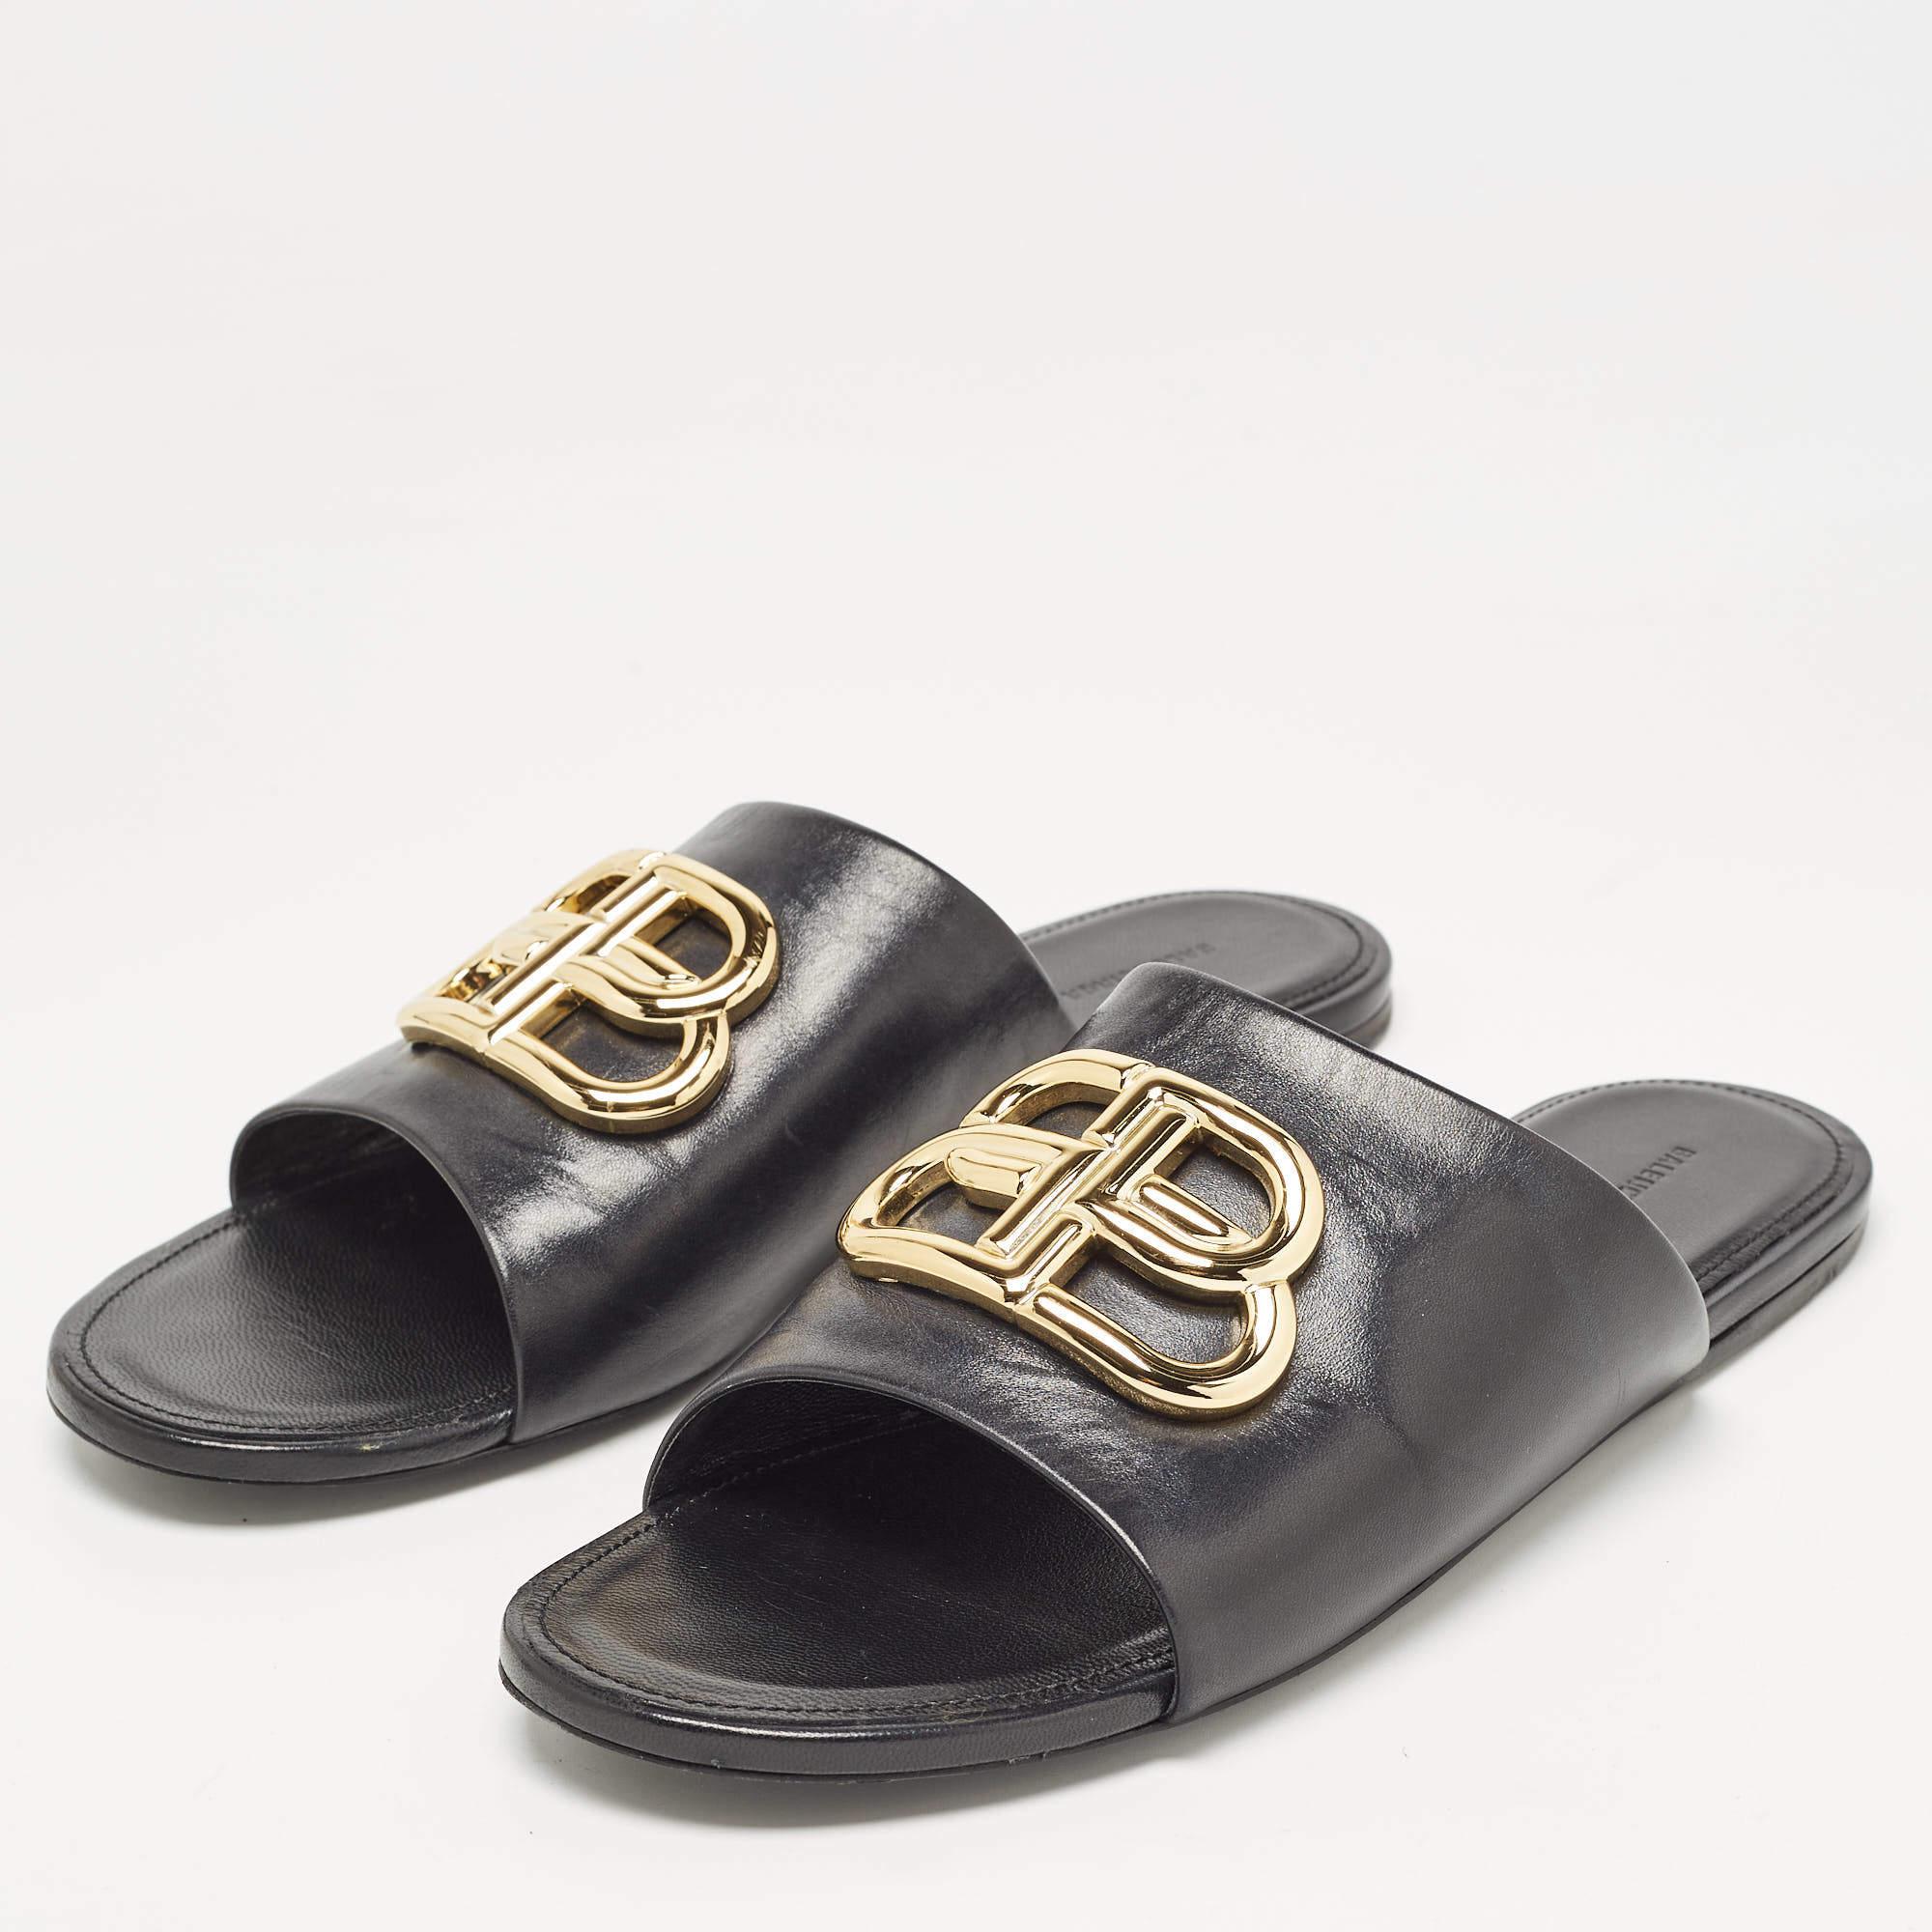 Supremely comfortable and stylish, these slides from the house of Balenciaga features a black leather design. They come with gold-tone BB detailing on the uppers and lined insoles. Team the slides with culottes or cropped trousers to show them off.

